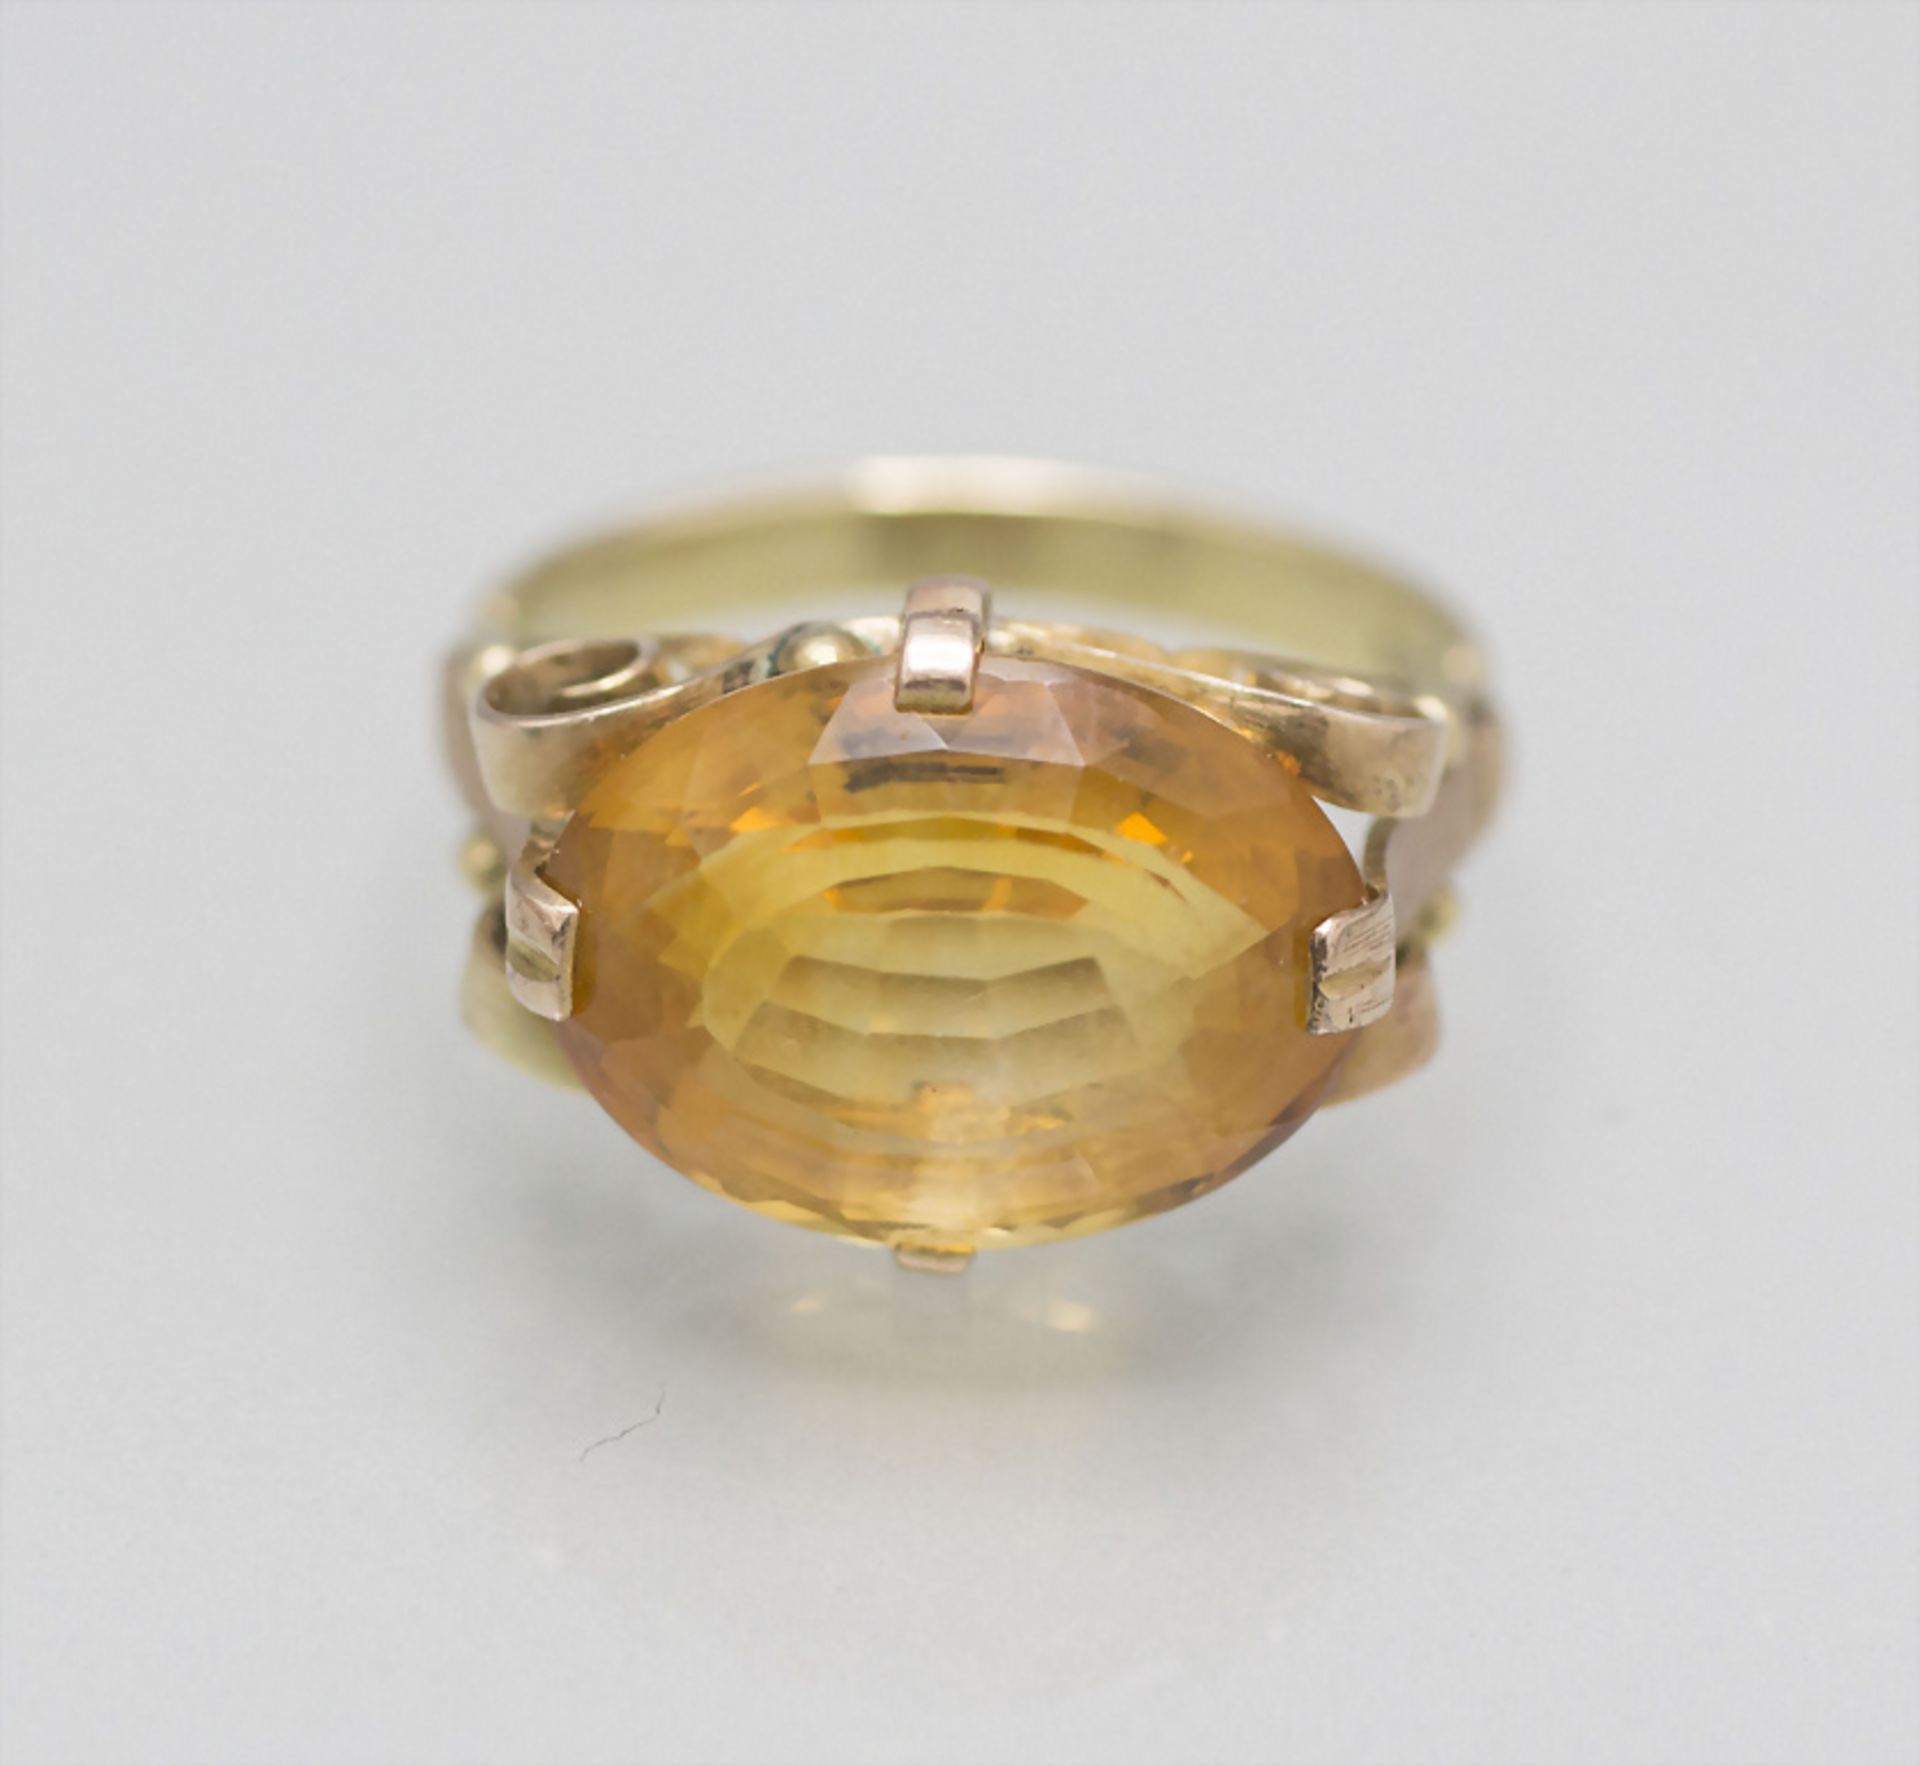 Damenring mit Citrin / A ladies 14 ct gold ring with citrine - Image 2 of 3